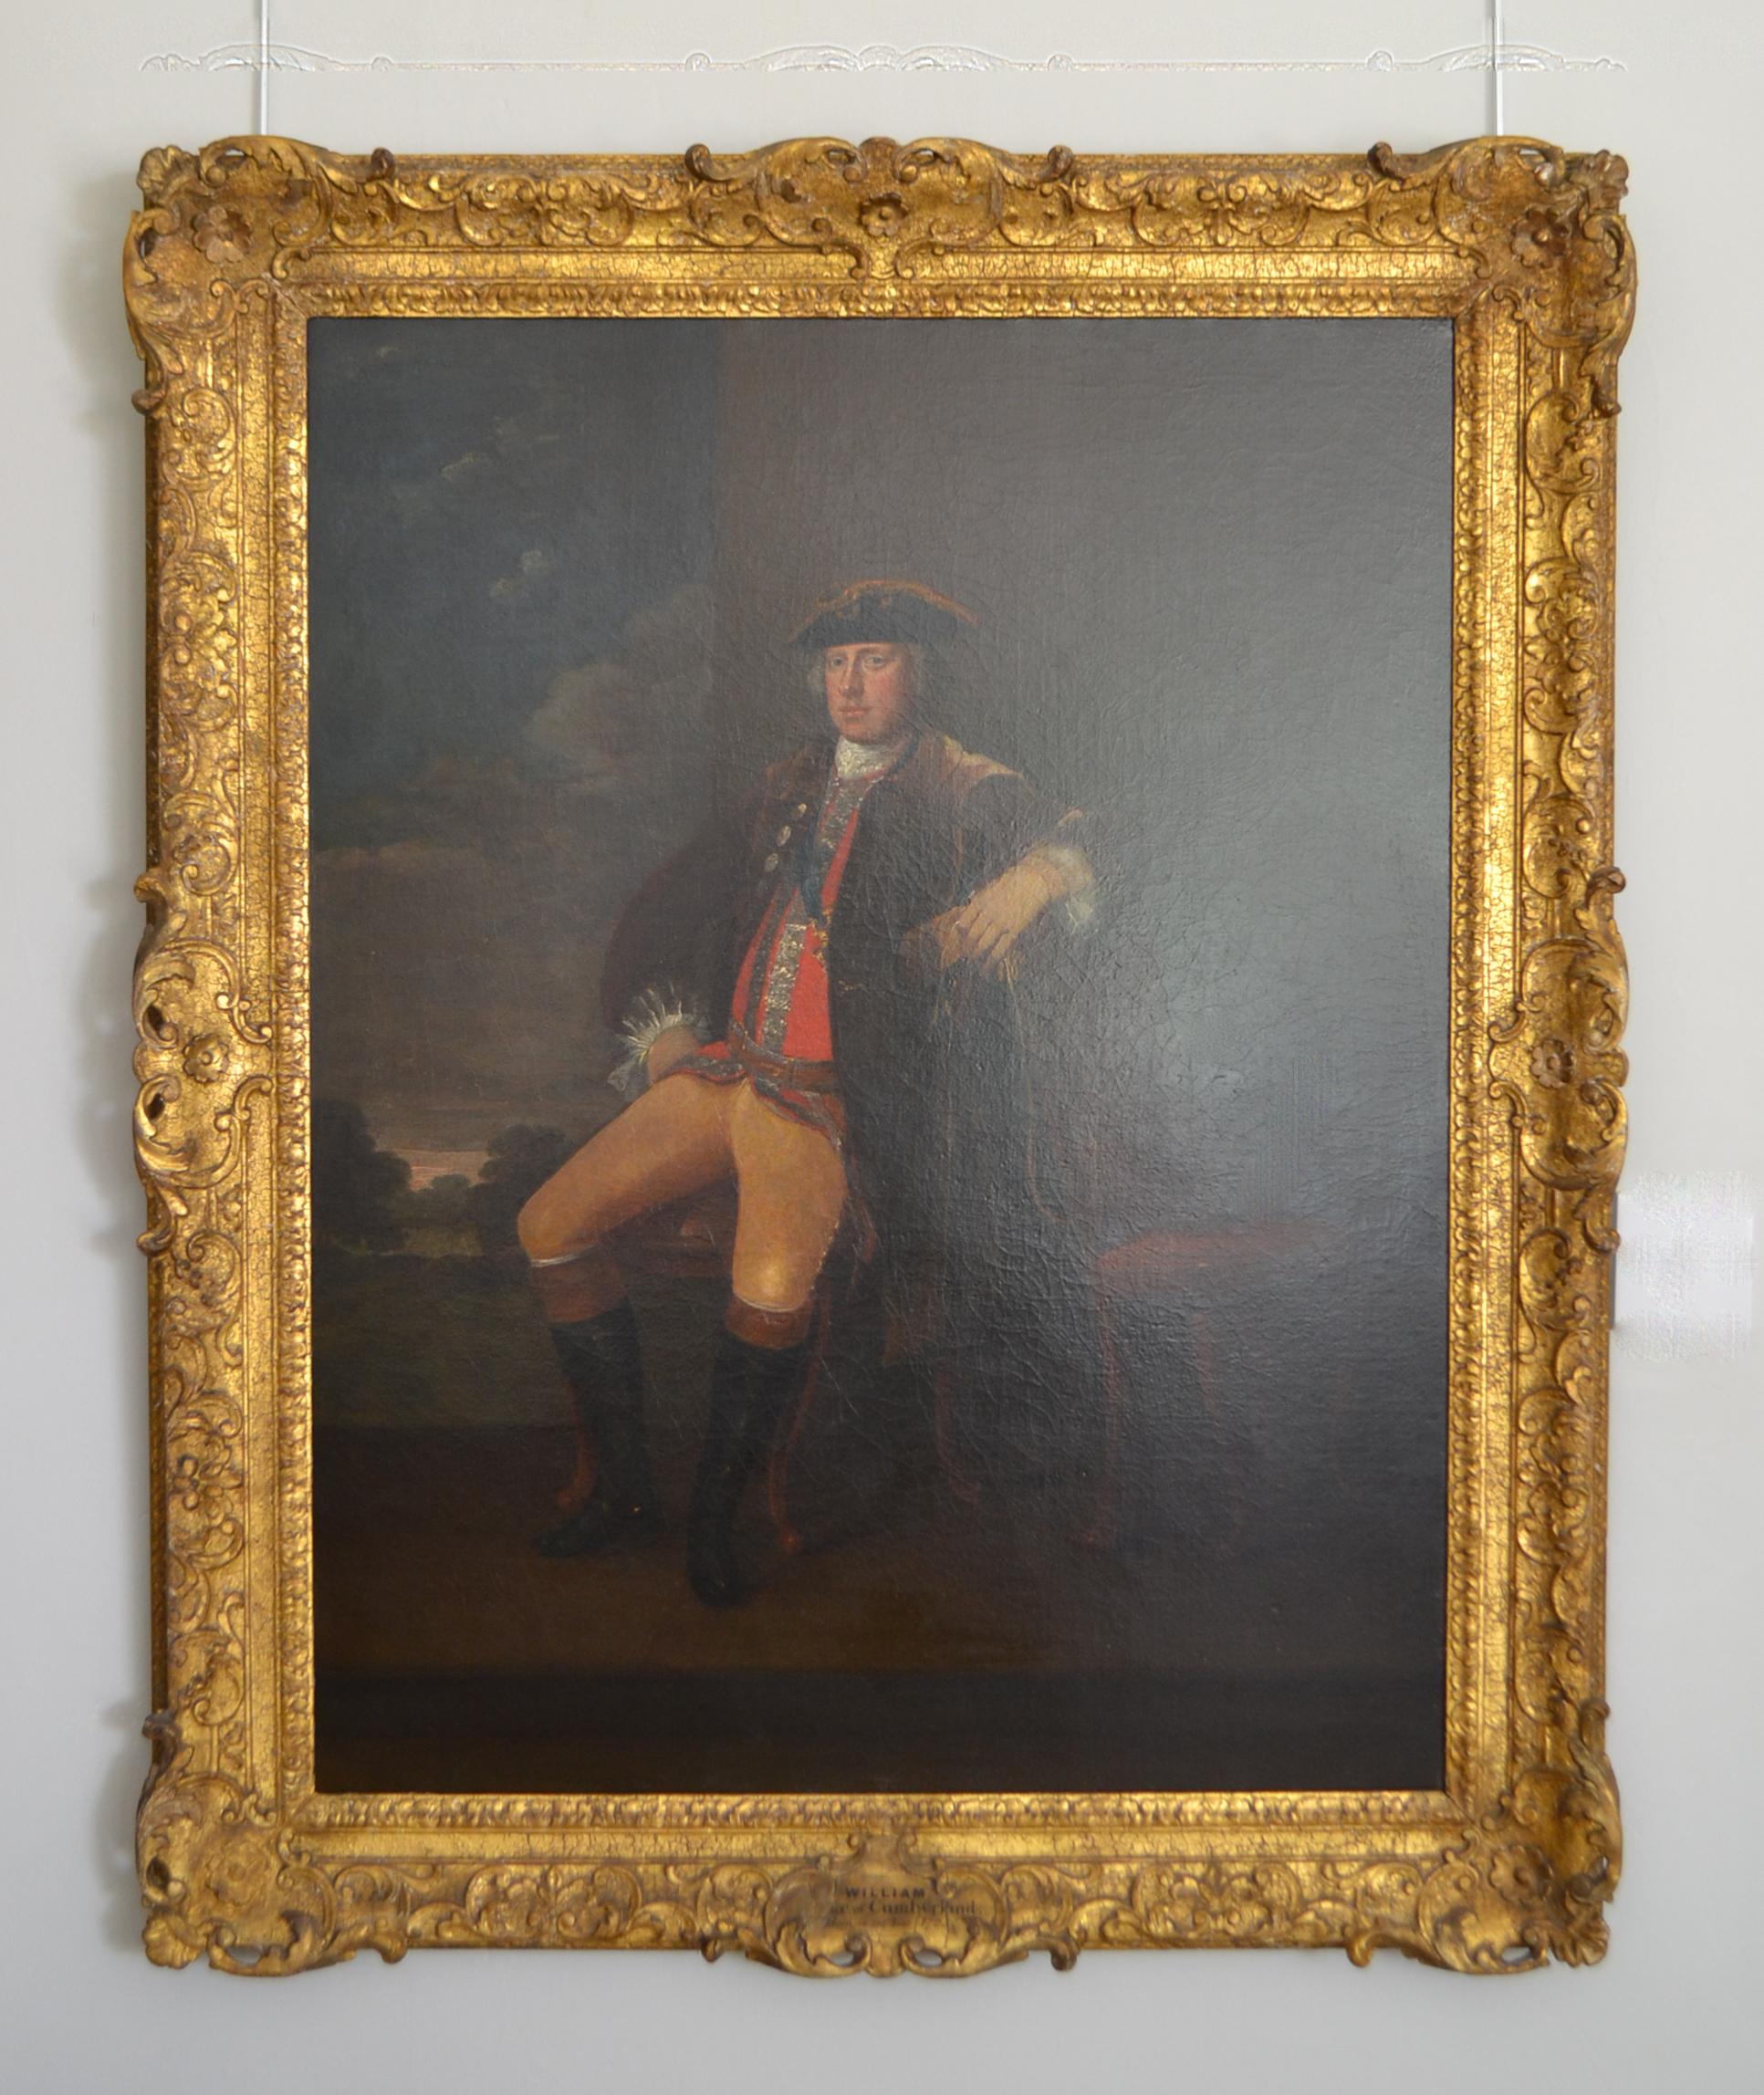 Portrait of a King's Messenger, 18th Century English Artist, Original Frame - Painting by Charles Philips